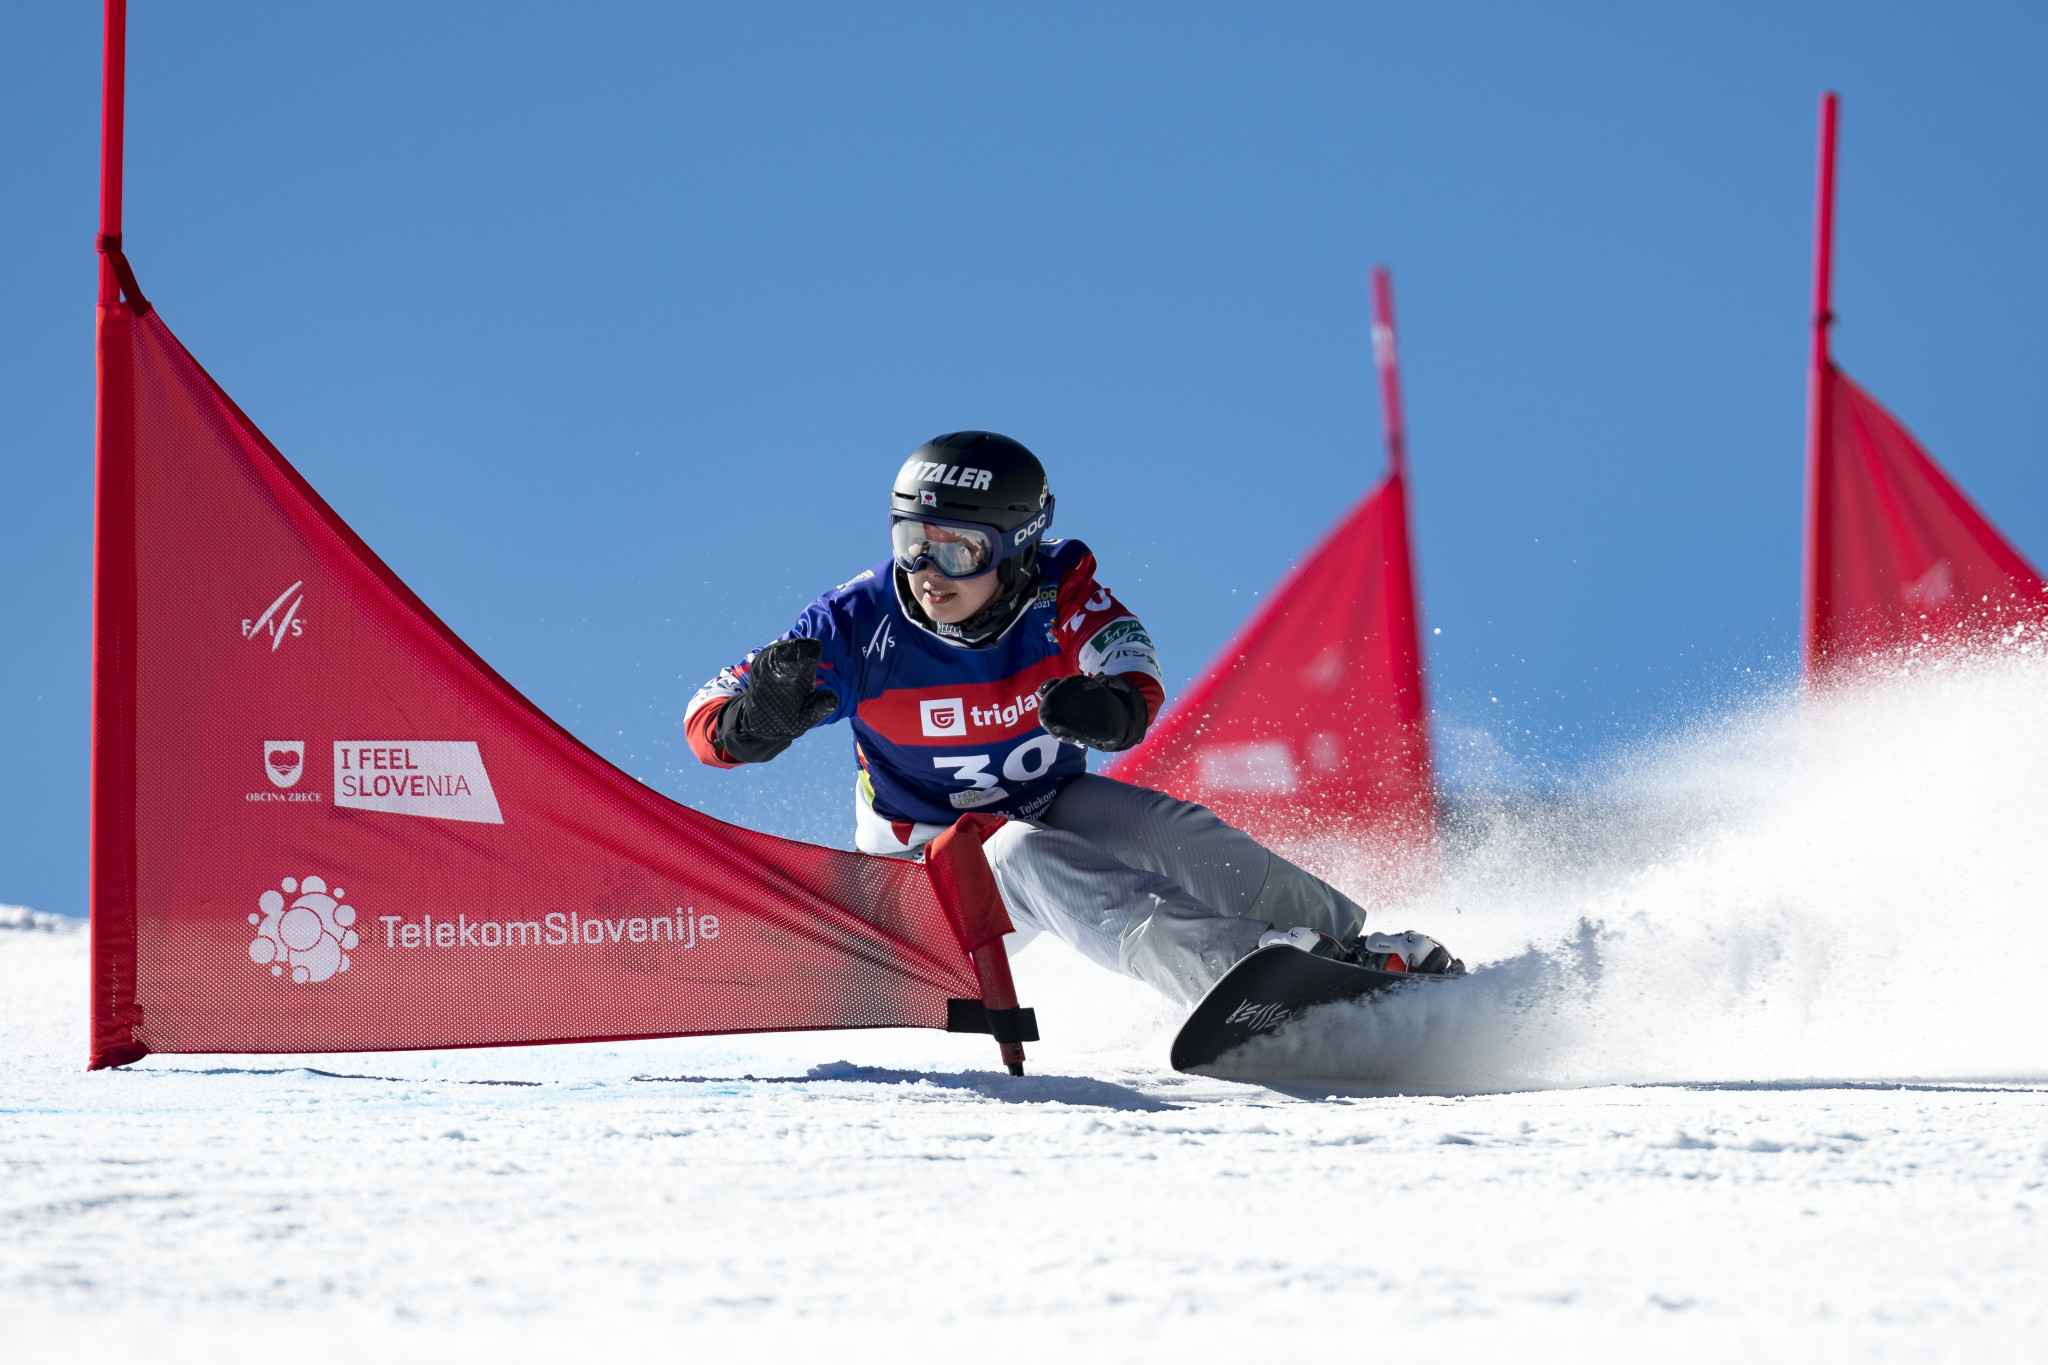 Miki wins again after leading Japan to Alpine Snowboard Junior World Championships win